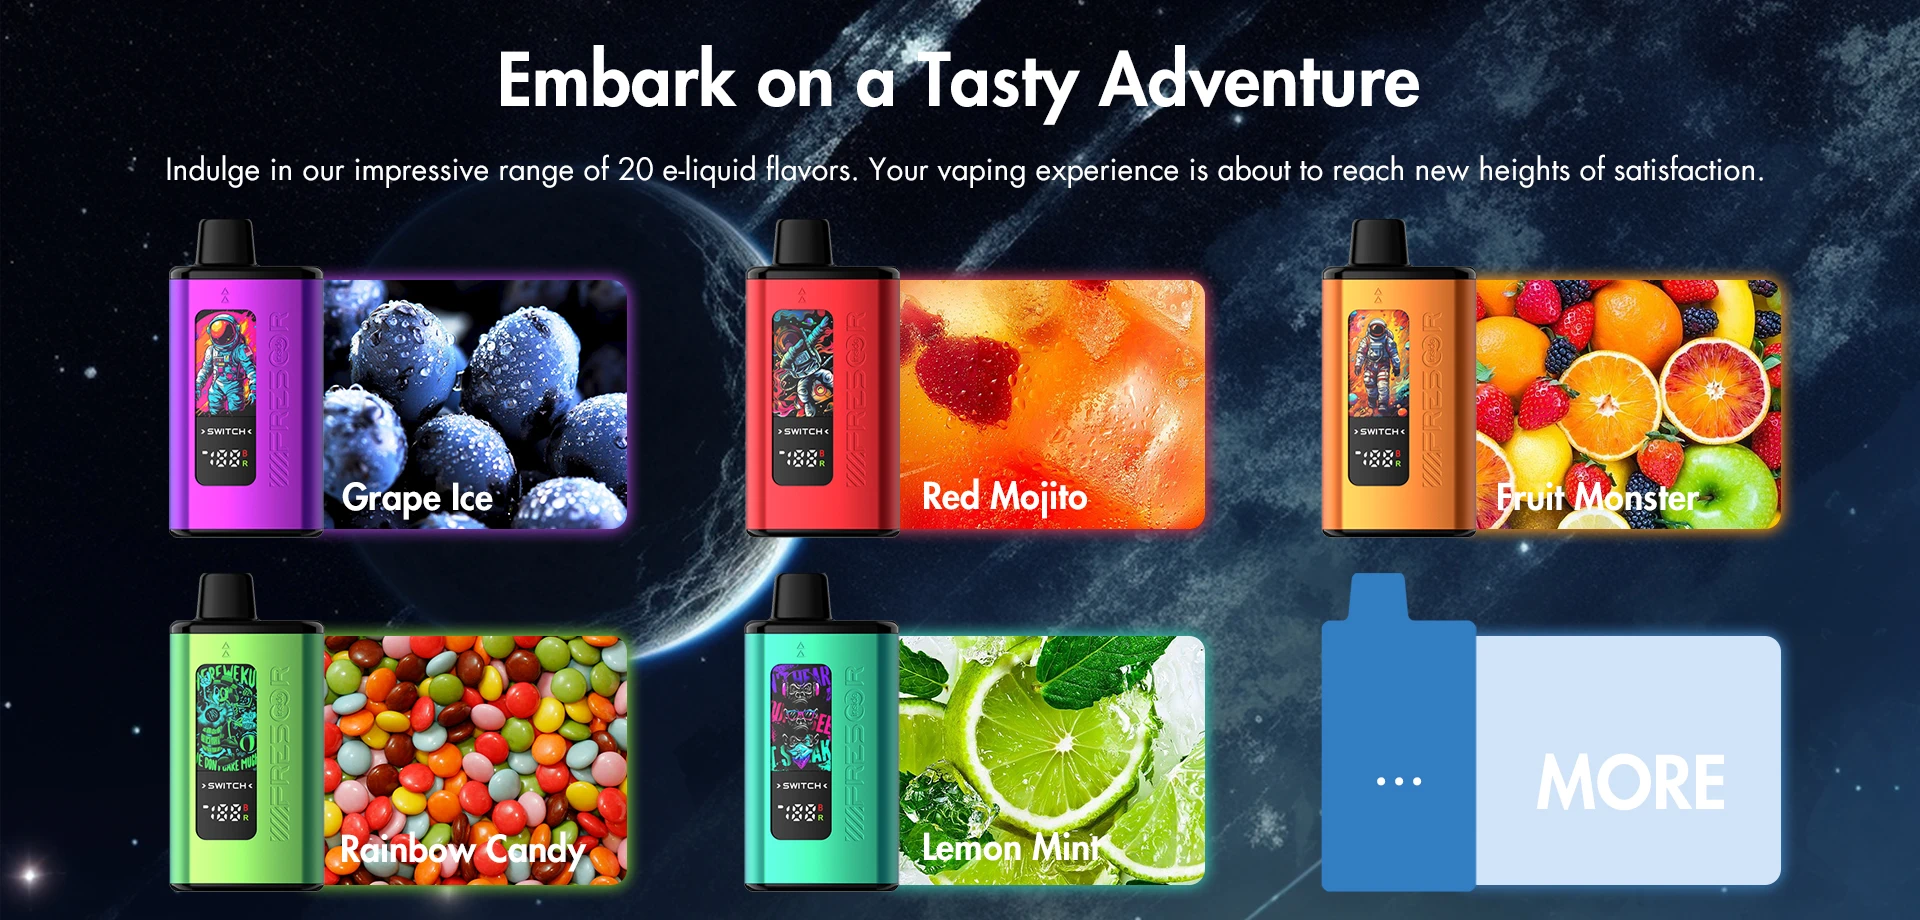 Embark on a Tasty Adventure Indulge in our impressive range of 20 e-liquid flavors. Your vaping experience is about to reach new heights of satisfaction.